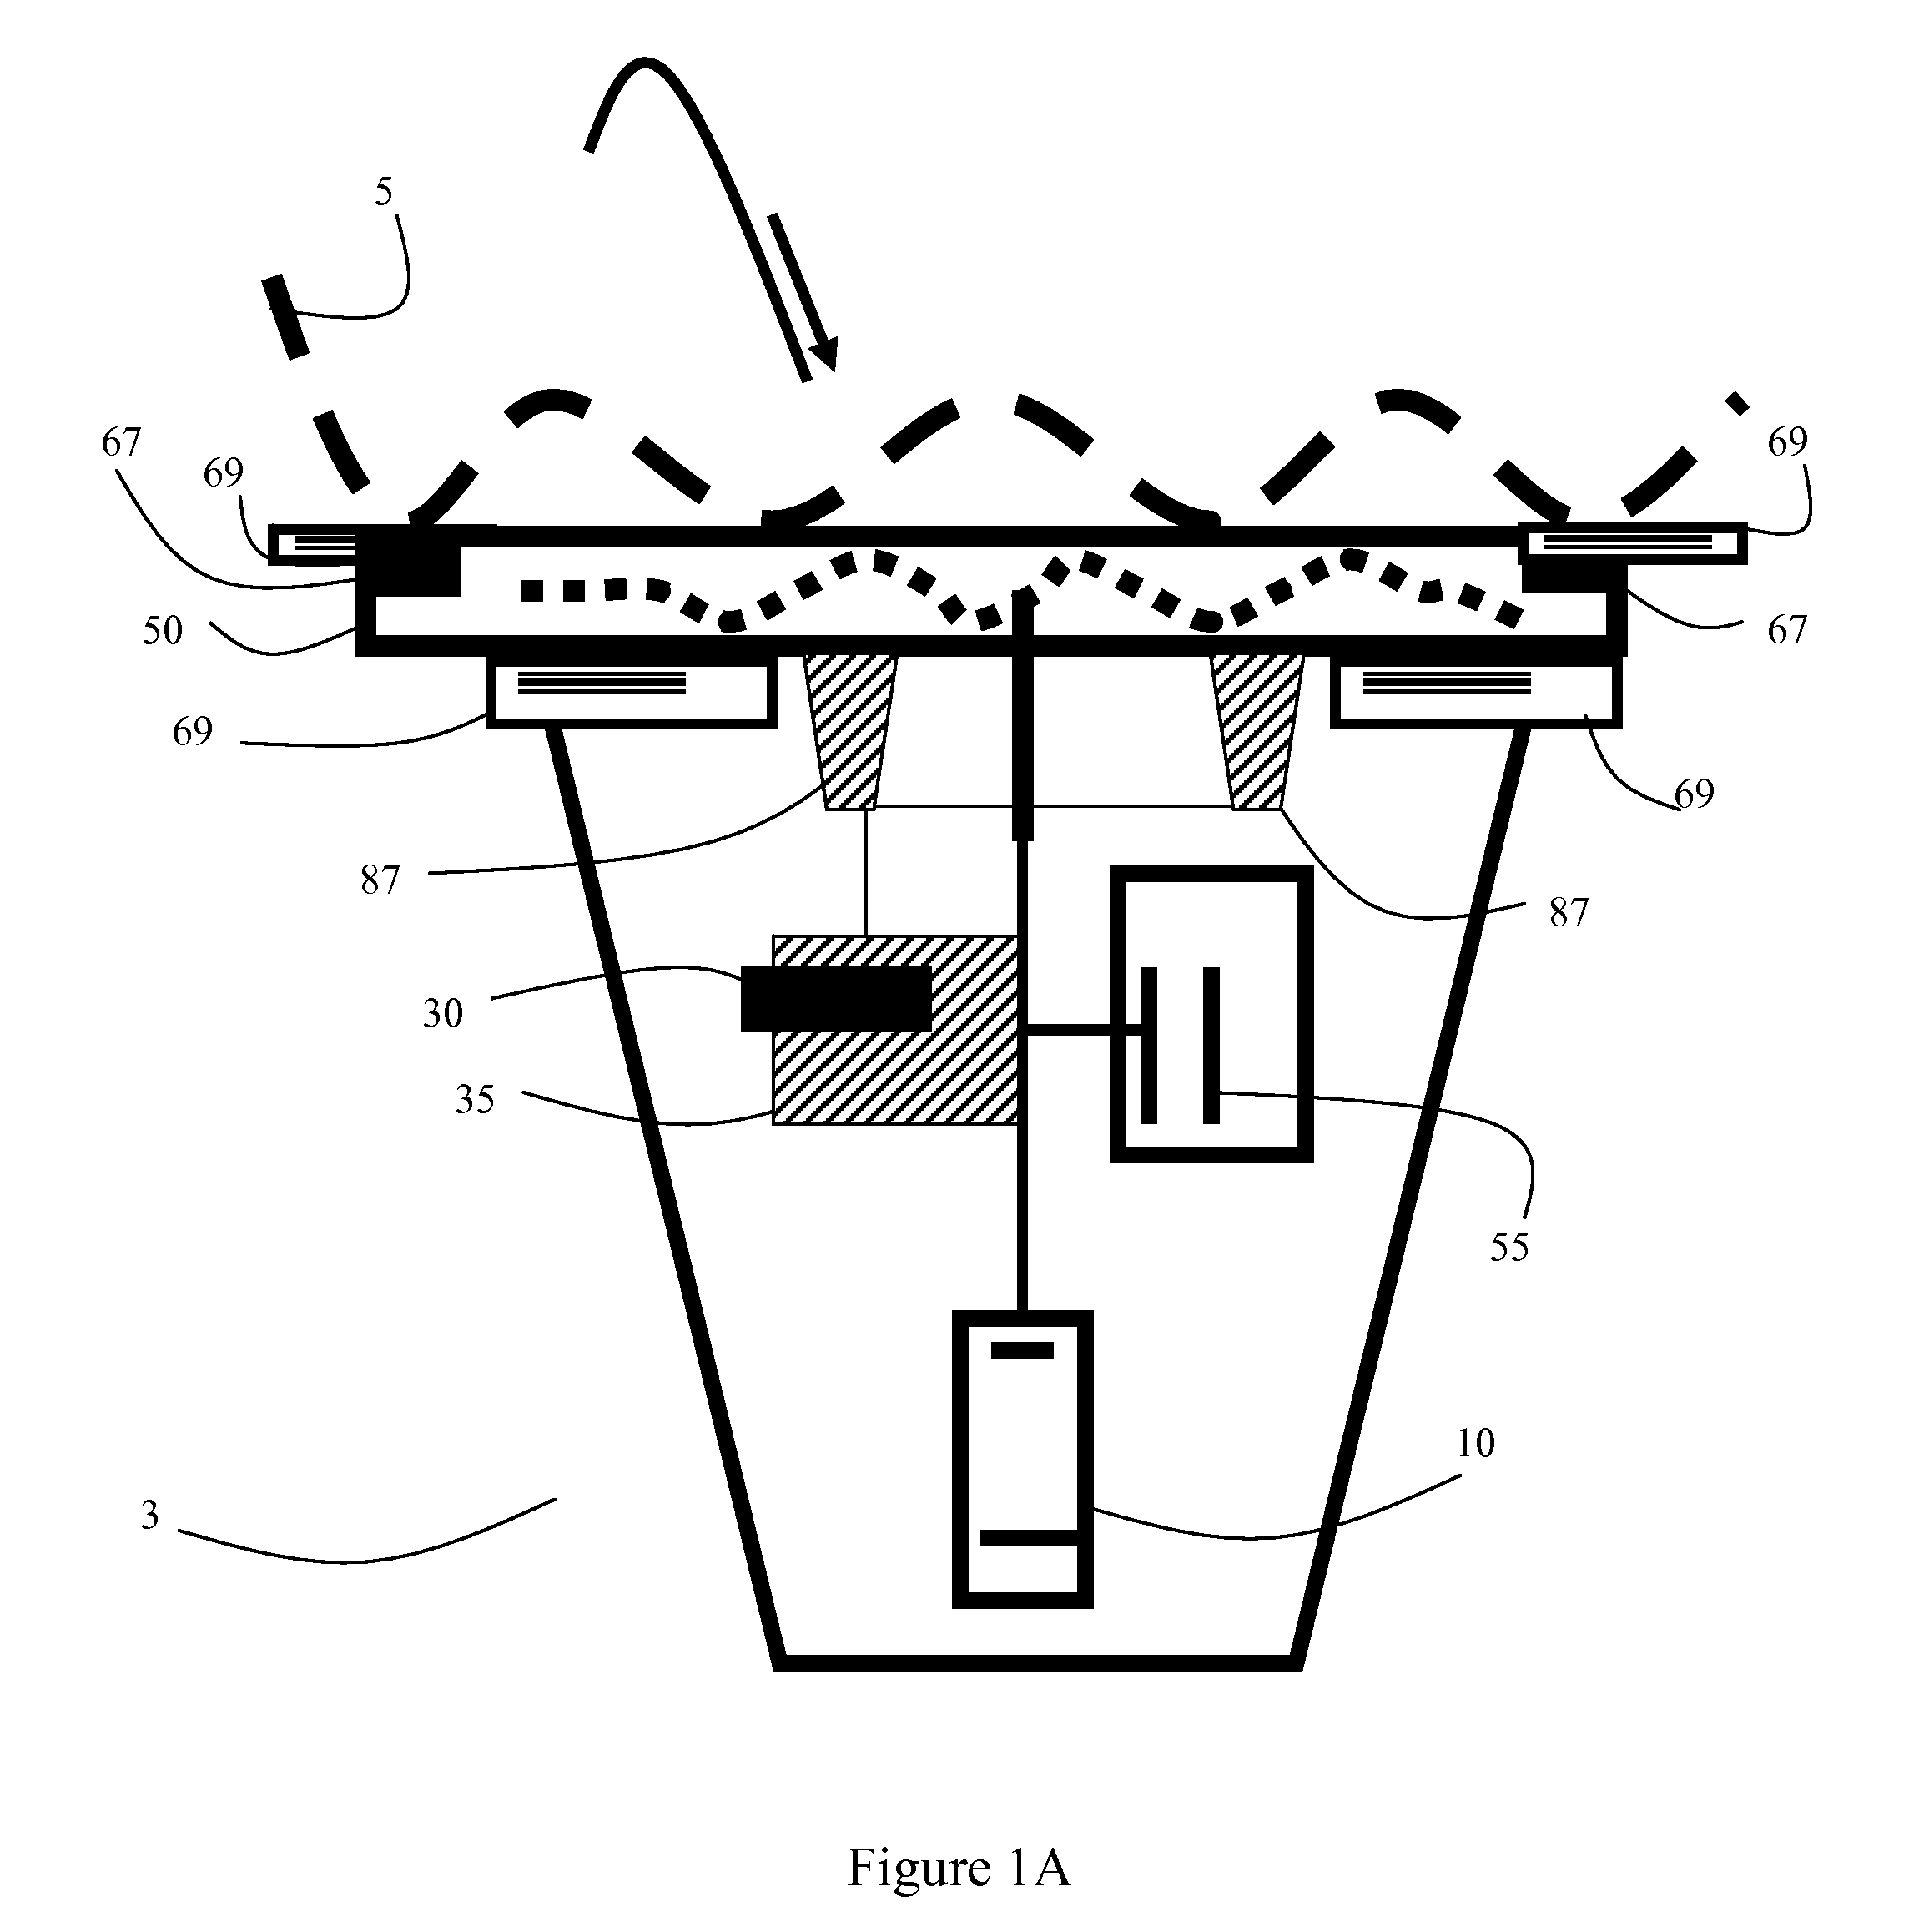 Home use device and methods for treating skin conditions